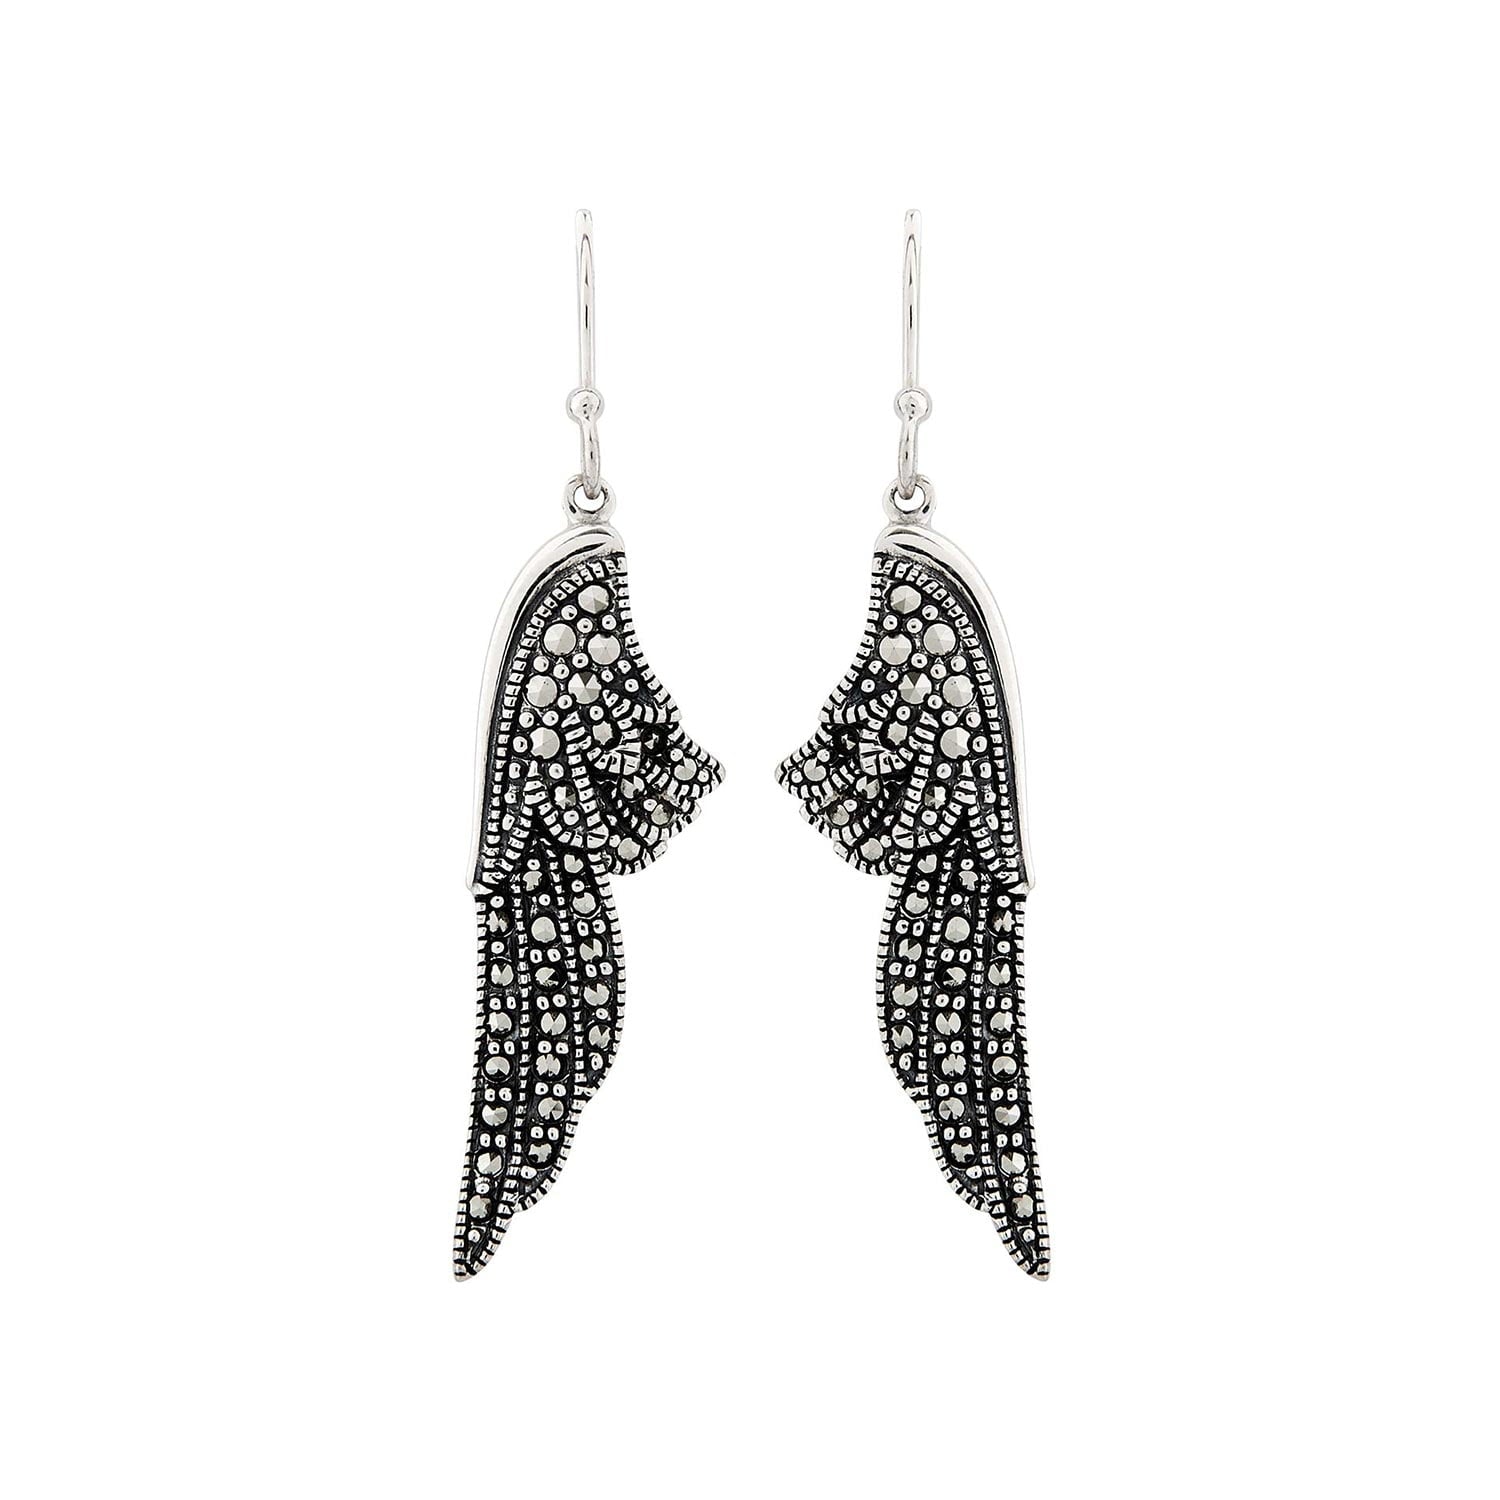 Angel Wing Drop Earrings: Silver and Marcasite